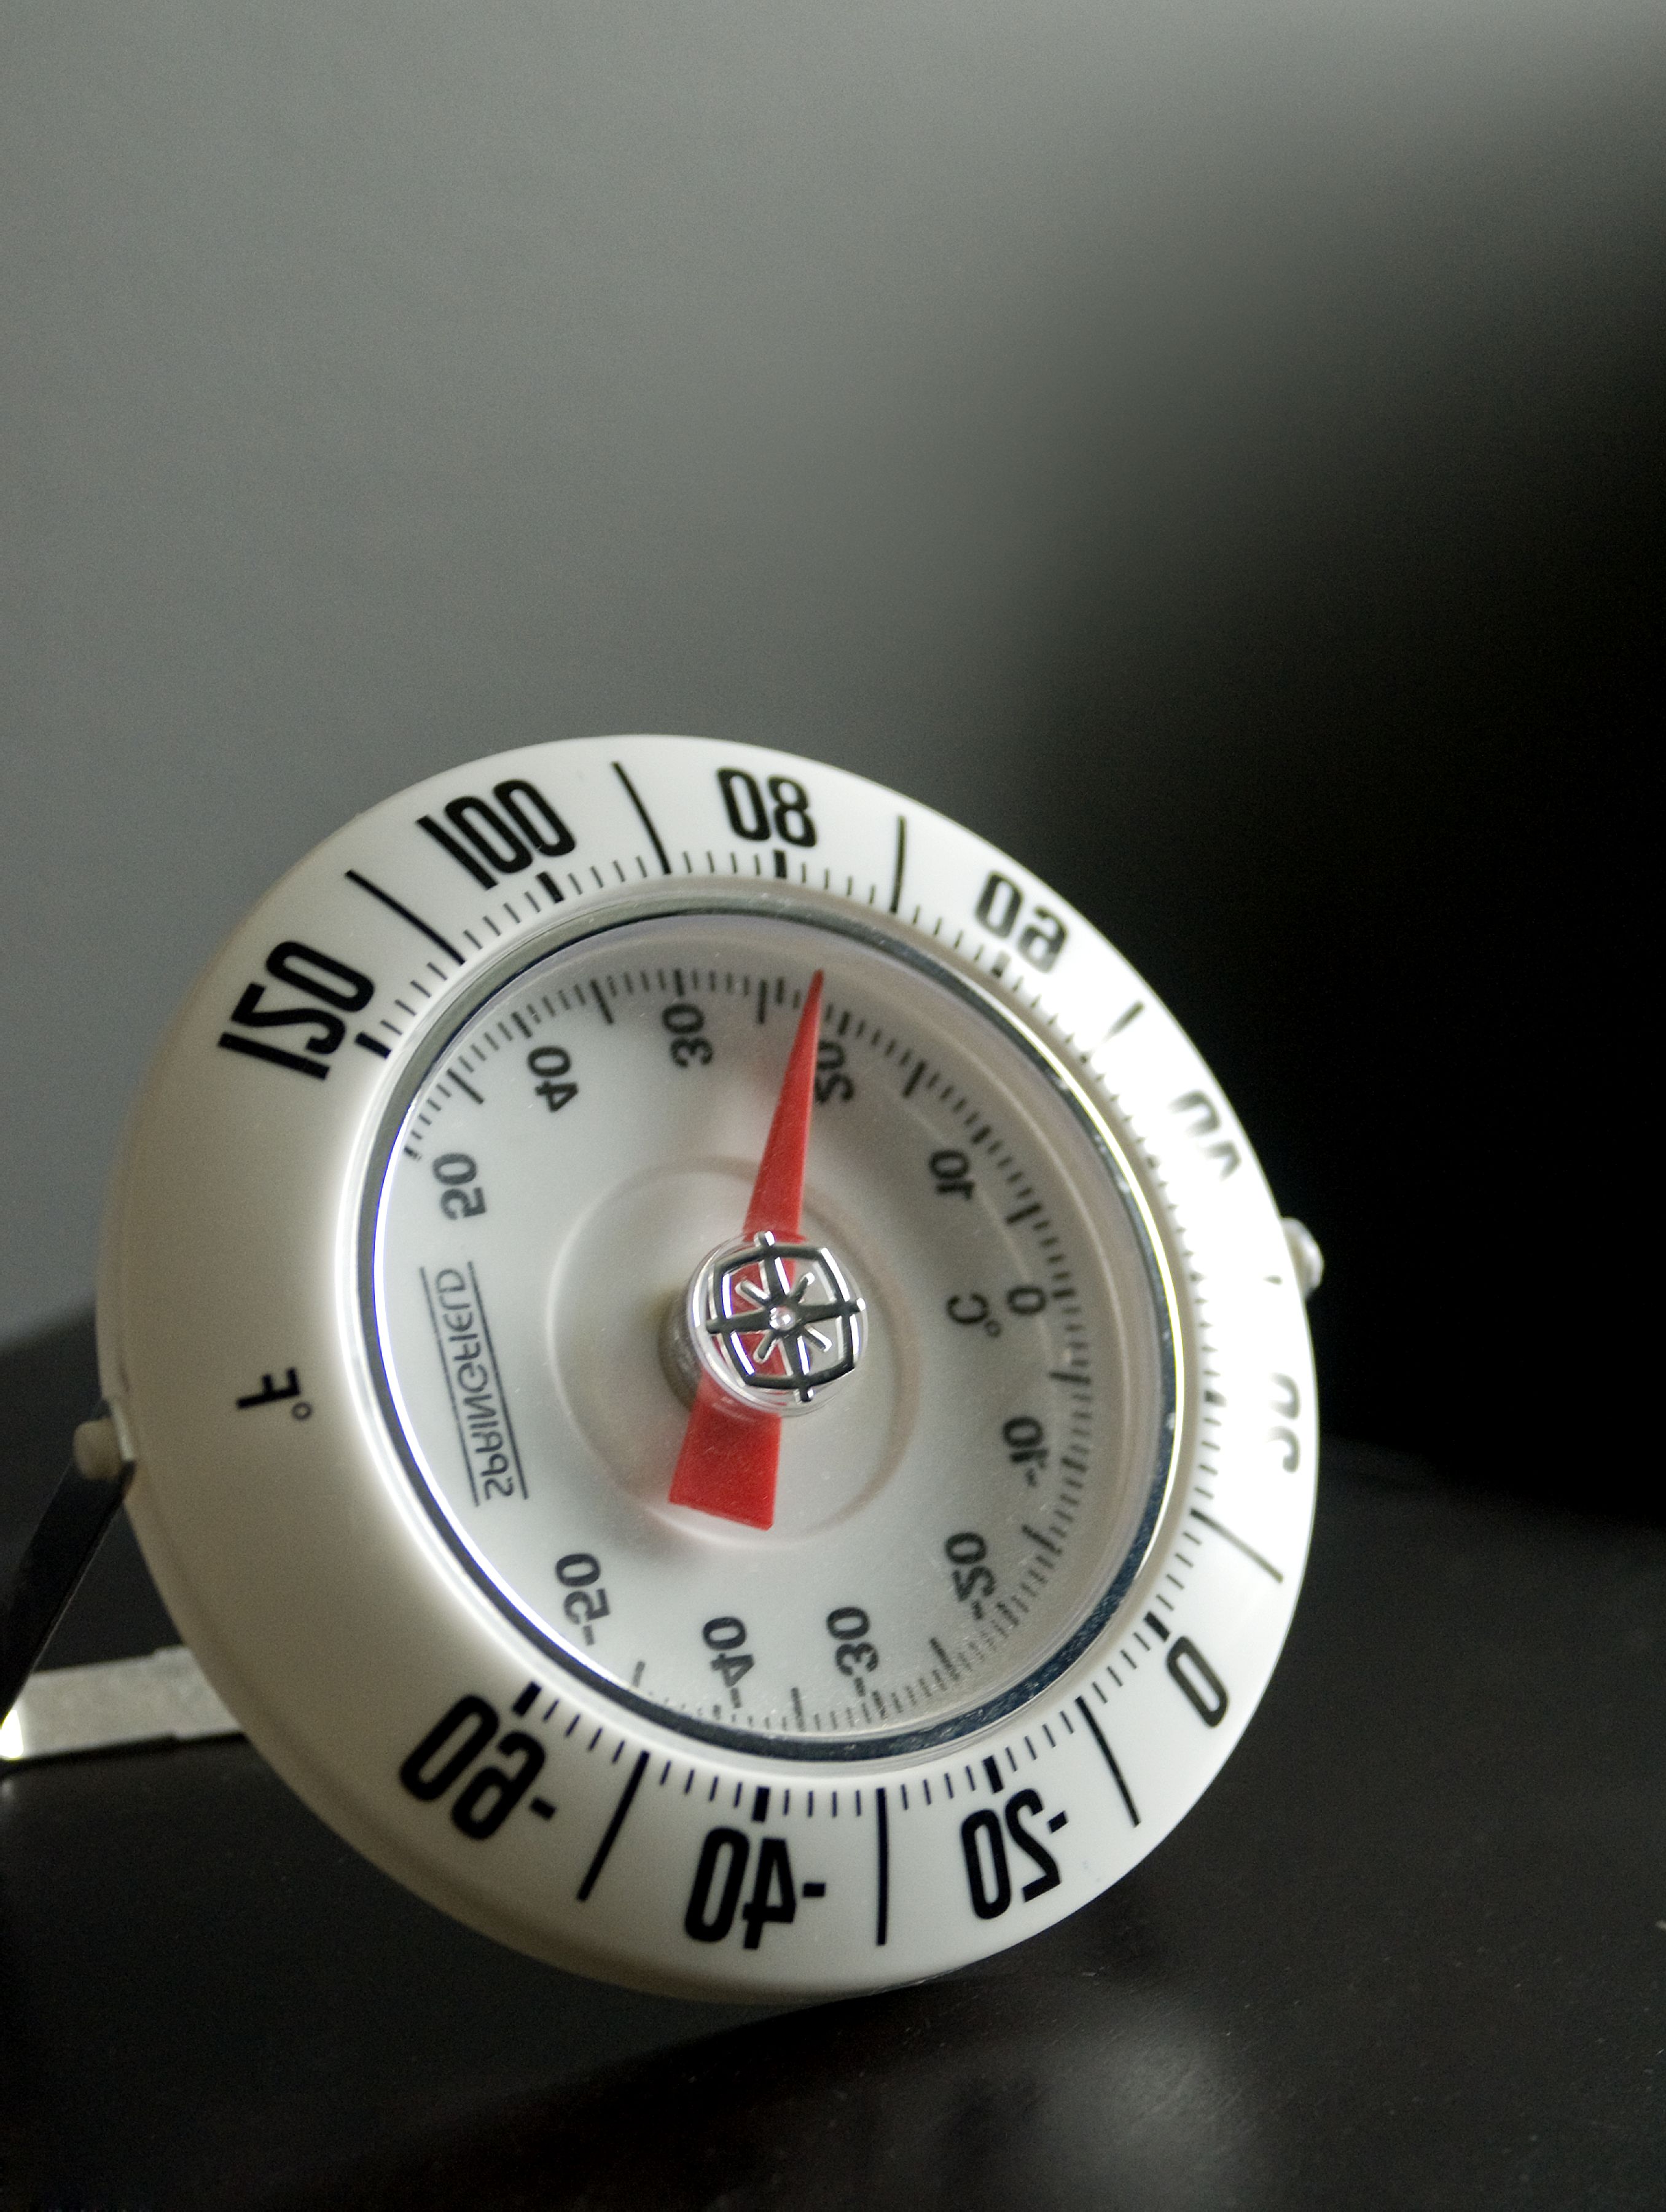 thermometer-was-reading-a-temperature